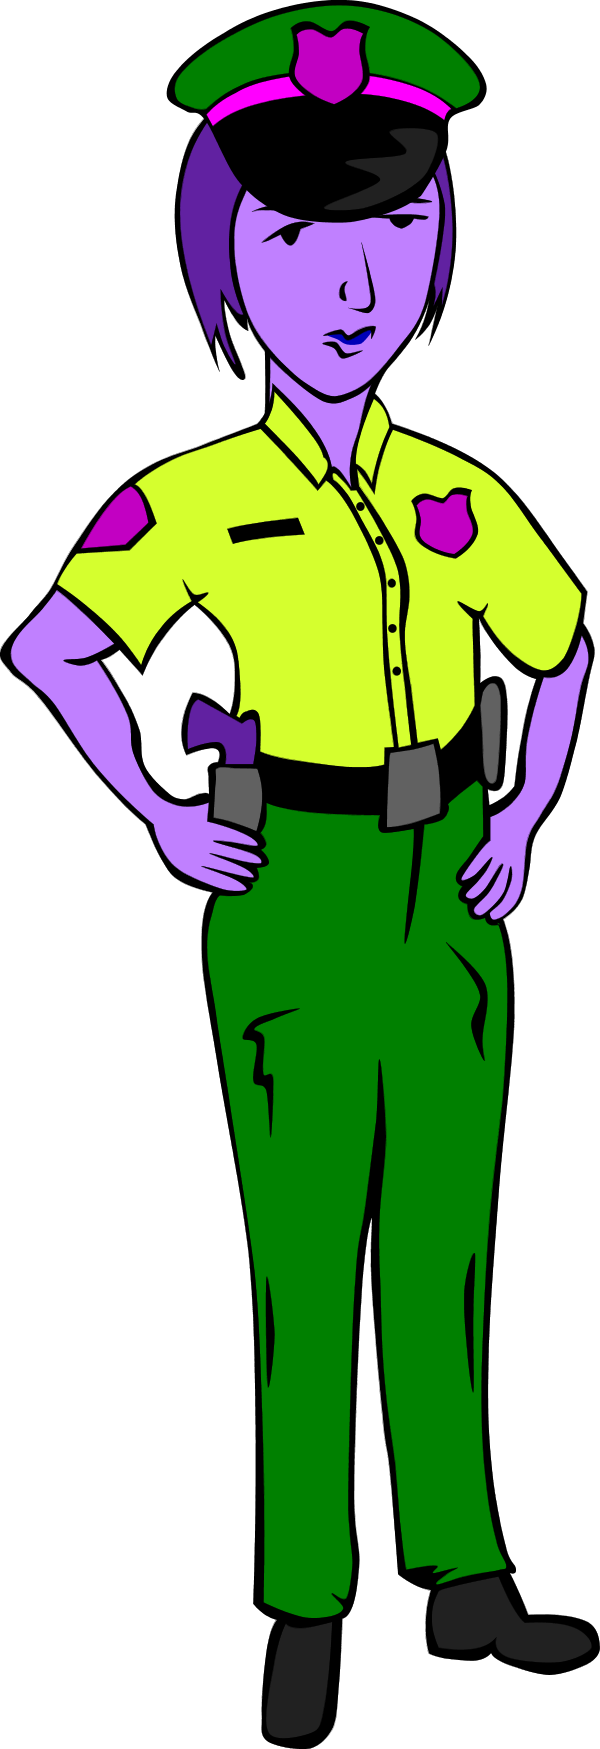 Large Woman Police Officer Clipart - Police Officer Clipart (600x1749)